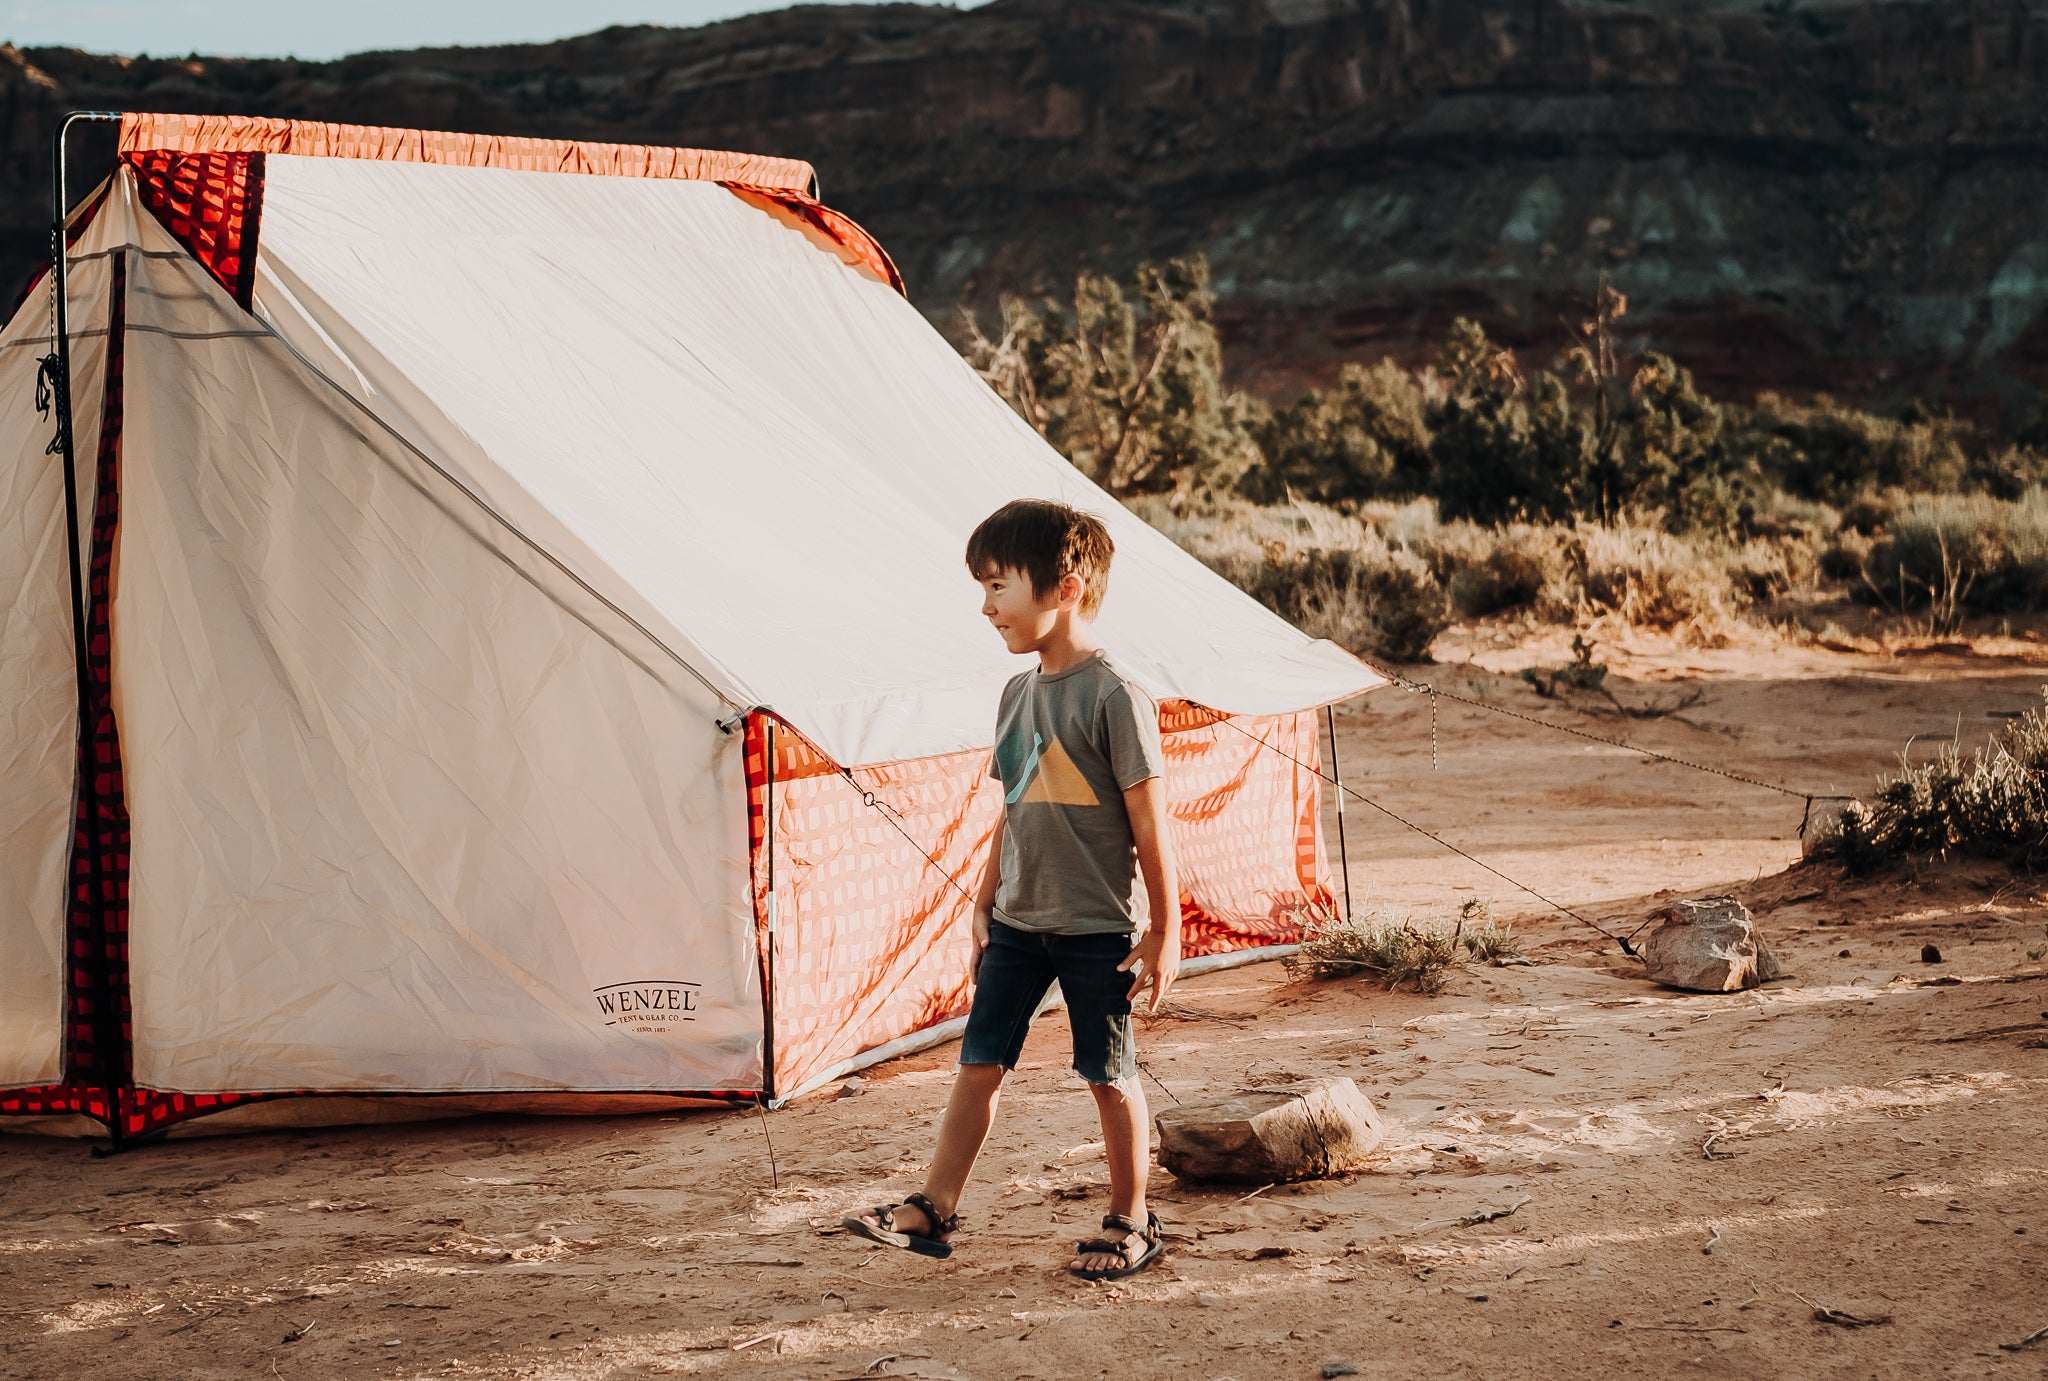 Kid standing next to a tent in the desert